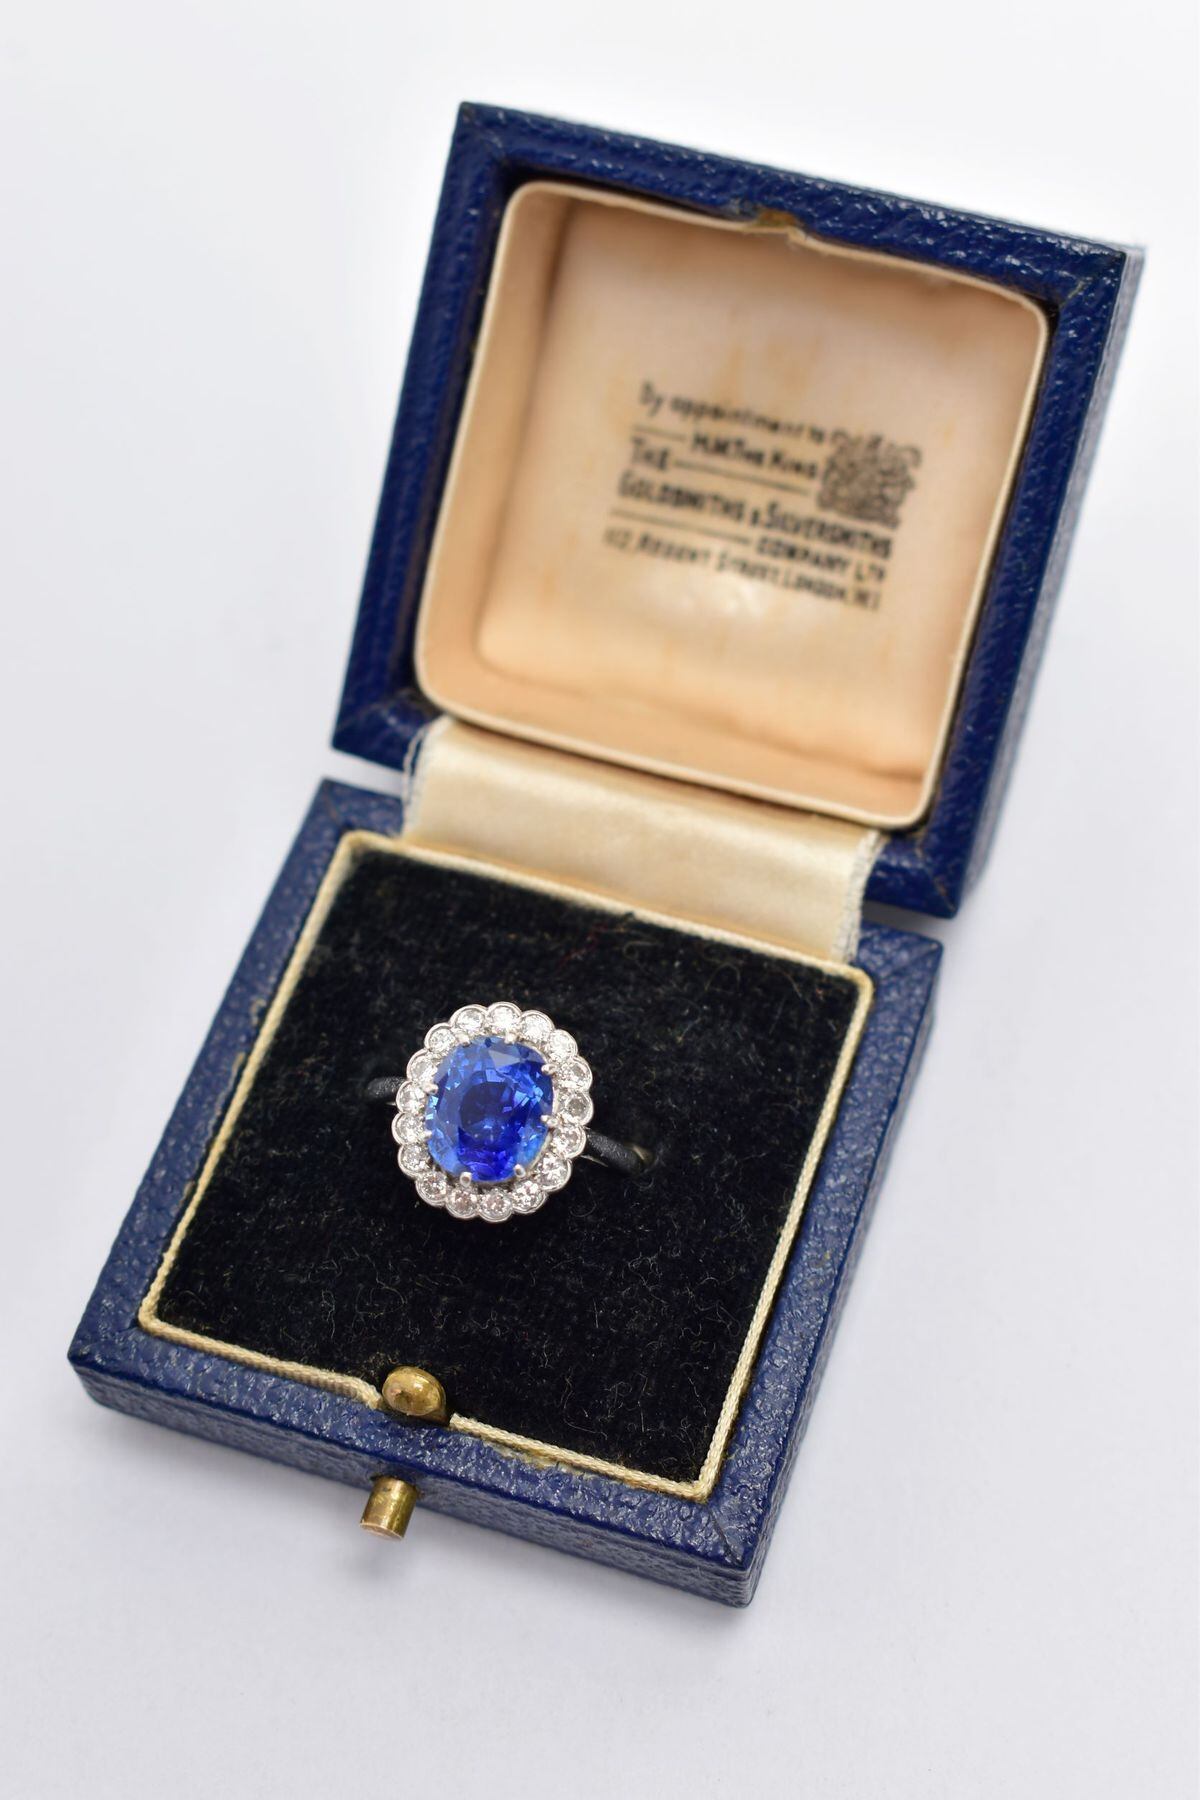 The sapphire ring which was hanging in a plastic bag in the porch